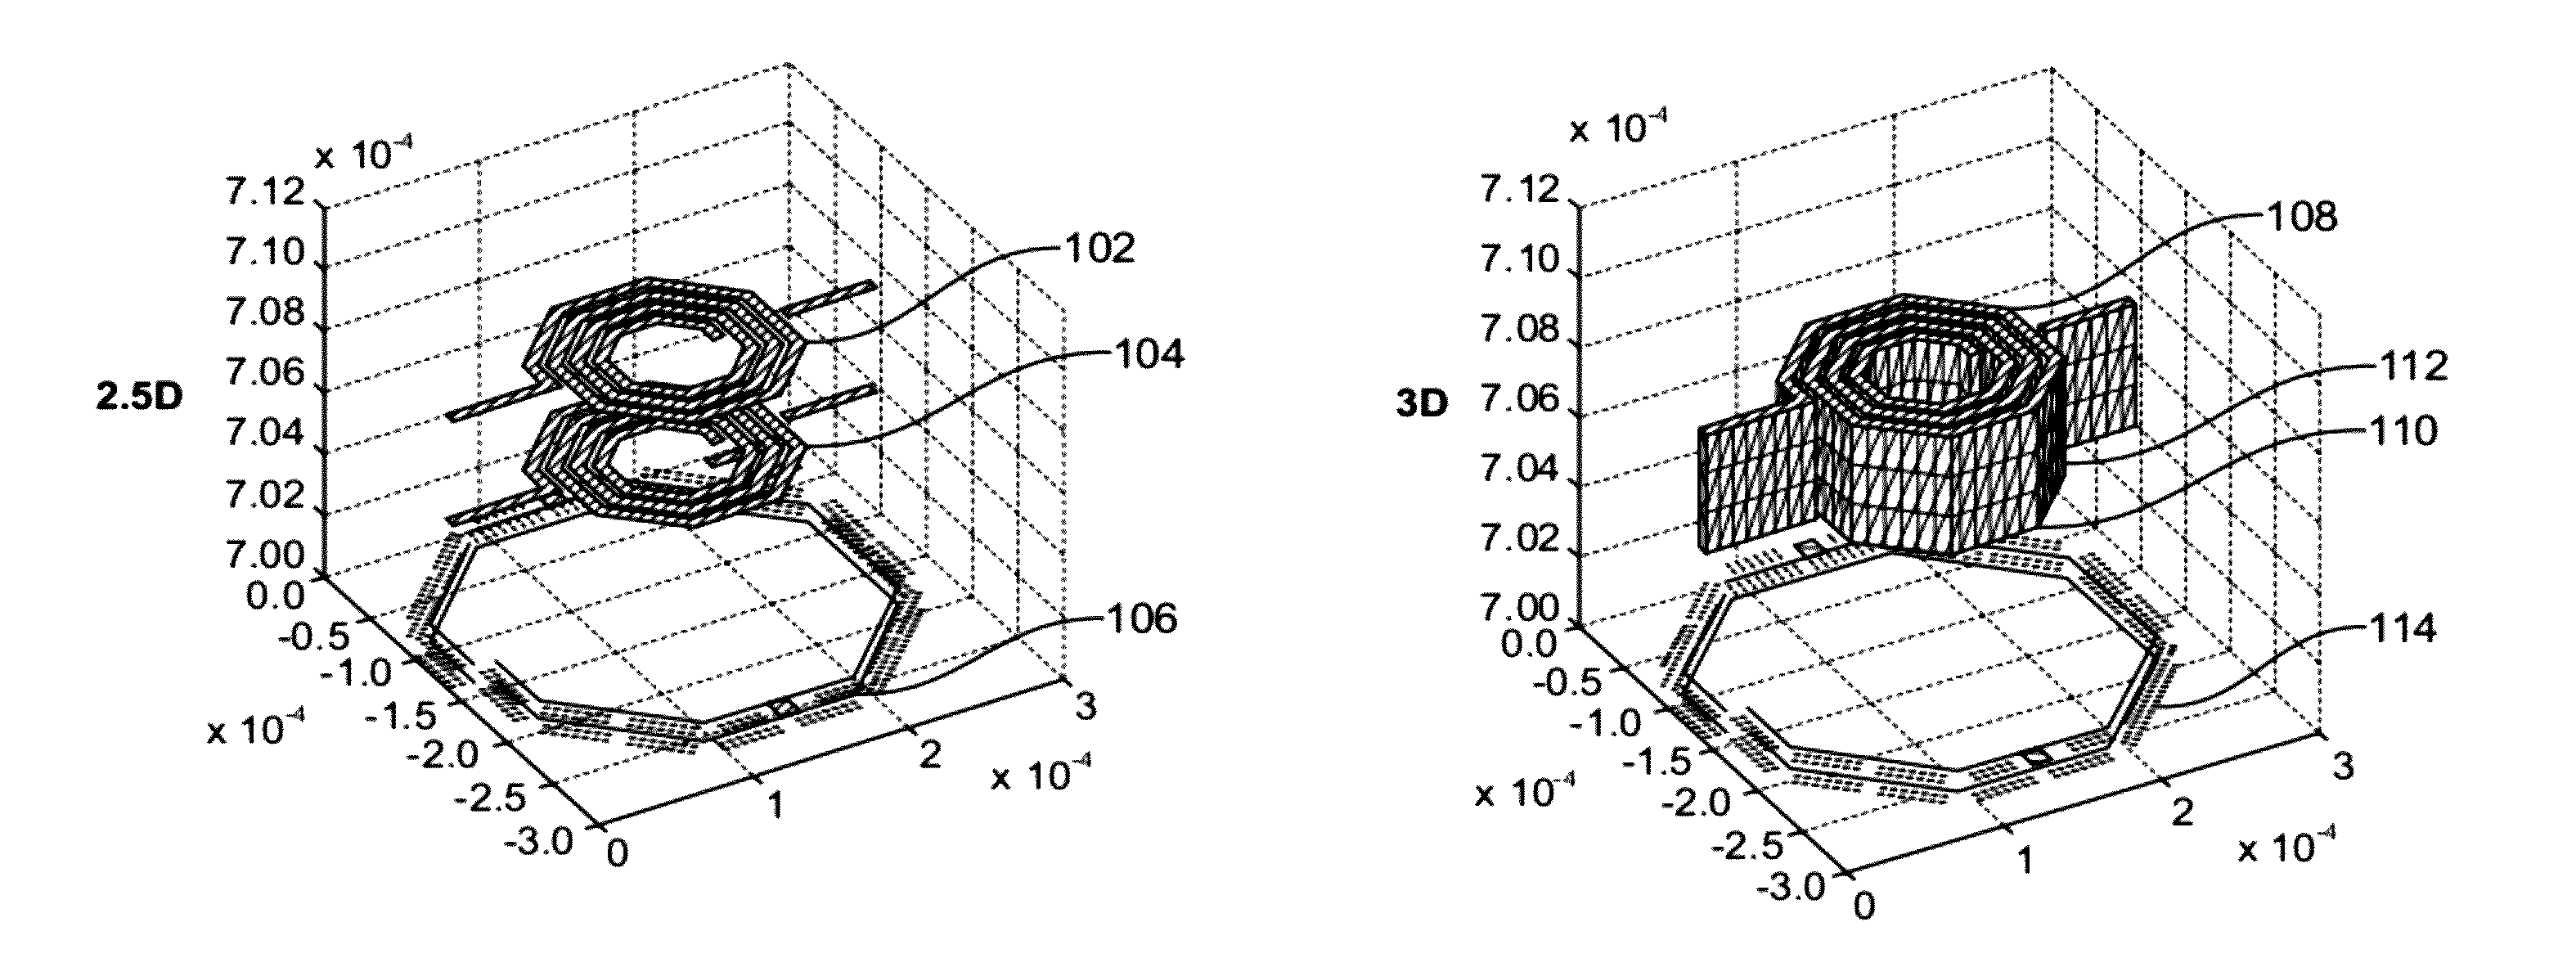 Method and apparatus for broadband electromagnetic modeling of three-dimensional interconnects embedded in multilayered substrates